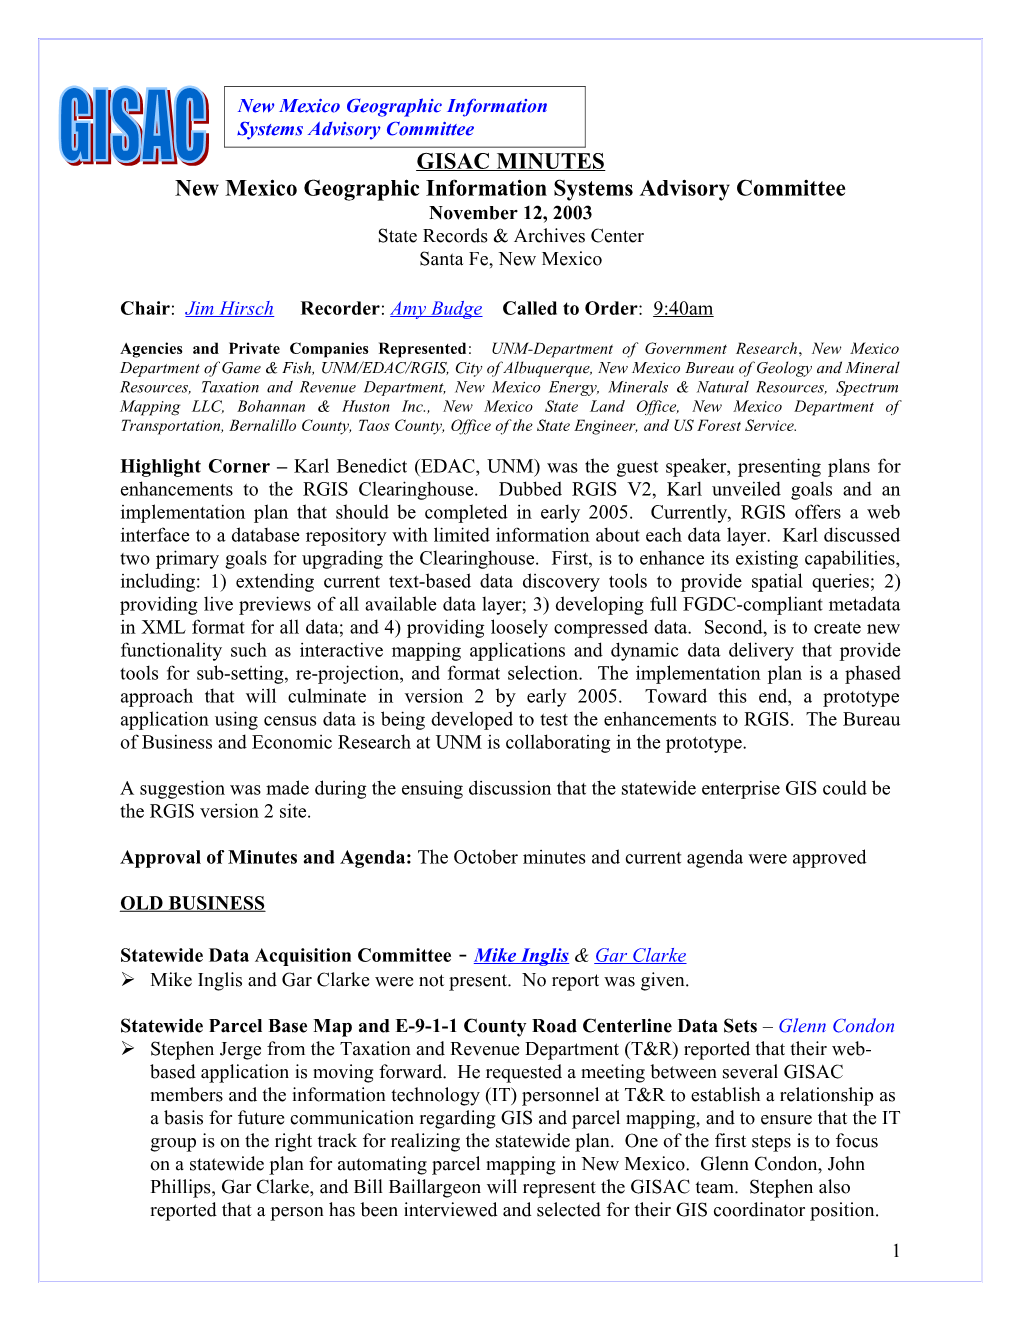 New Mexico Geographic Information System Advisory Committee s1